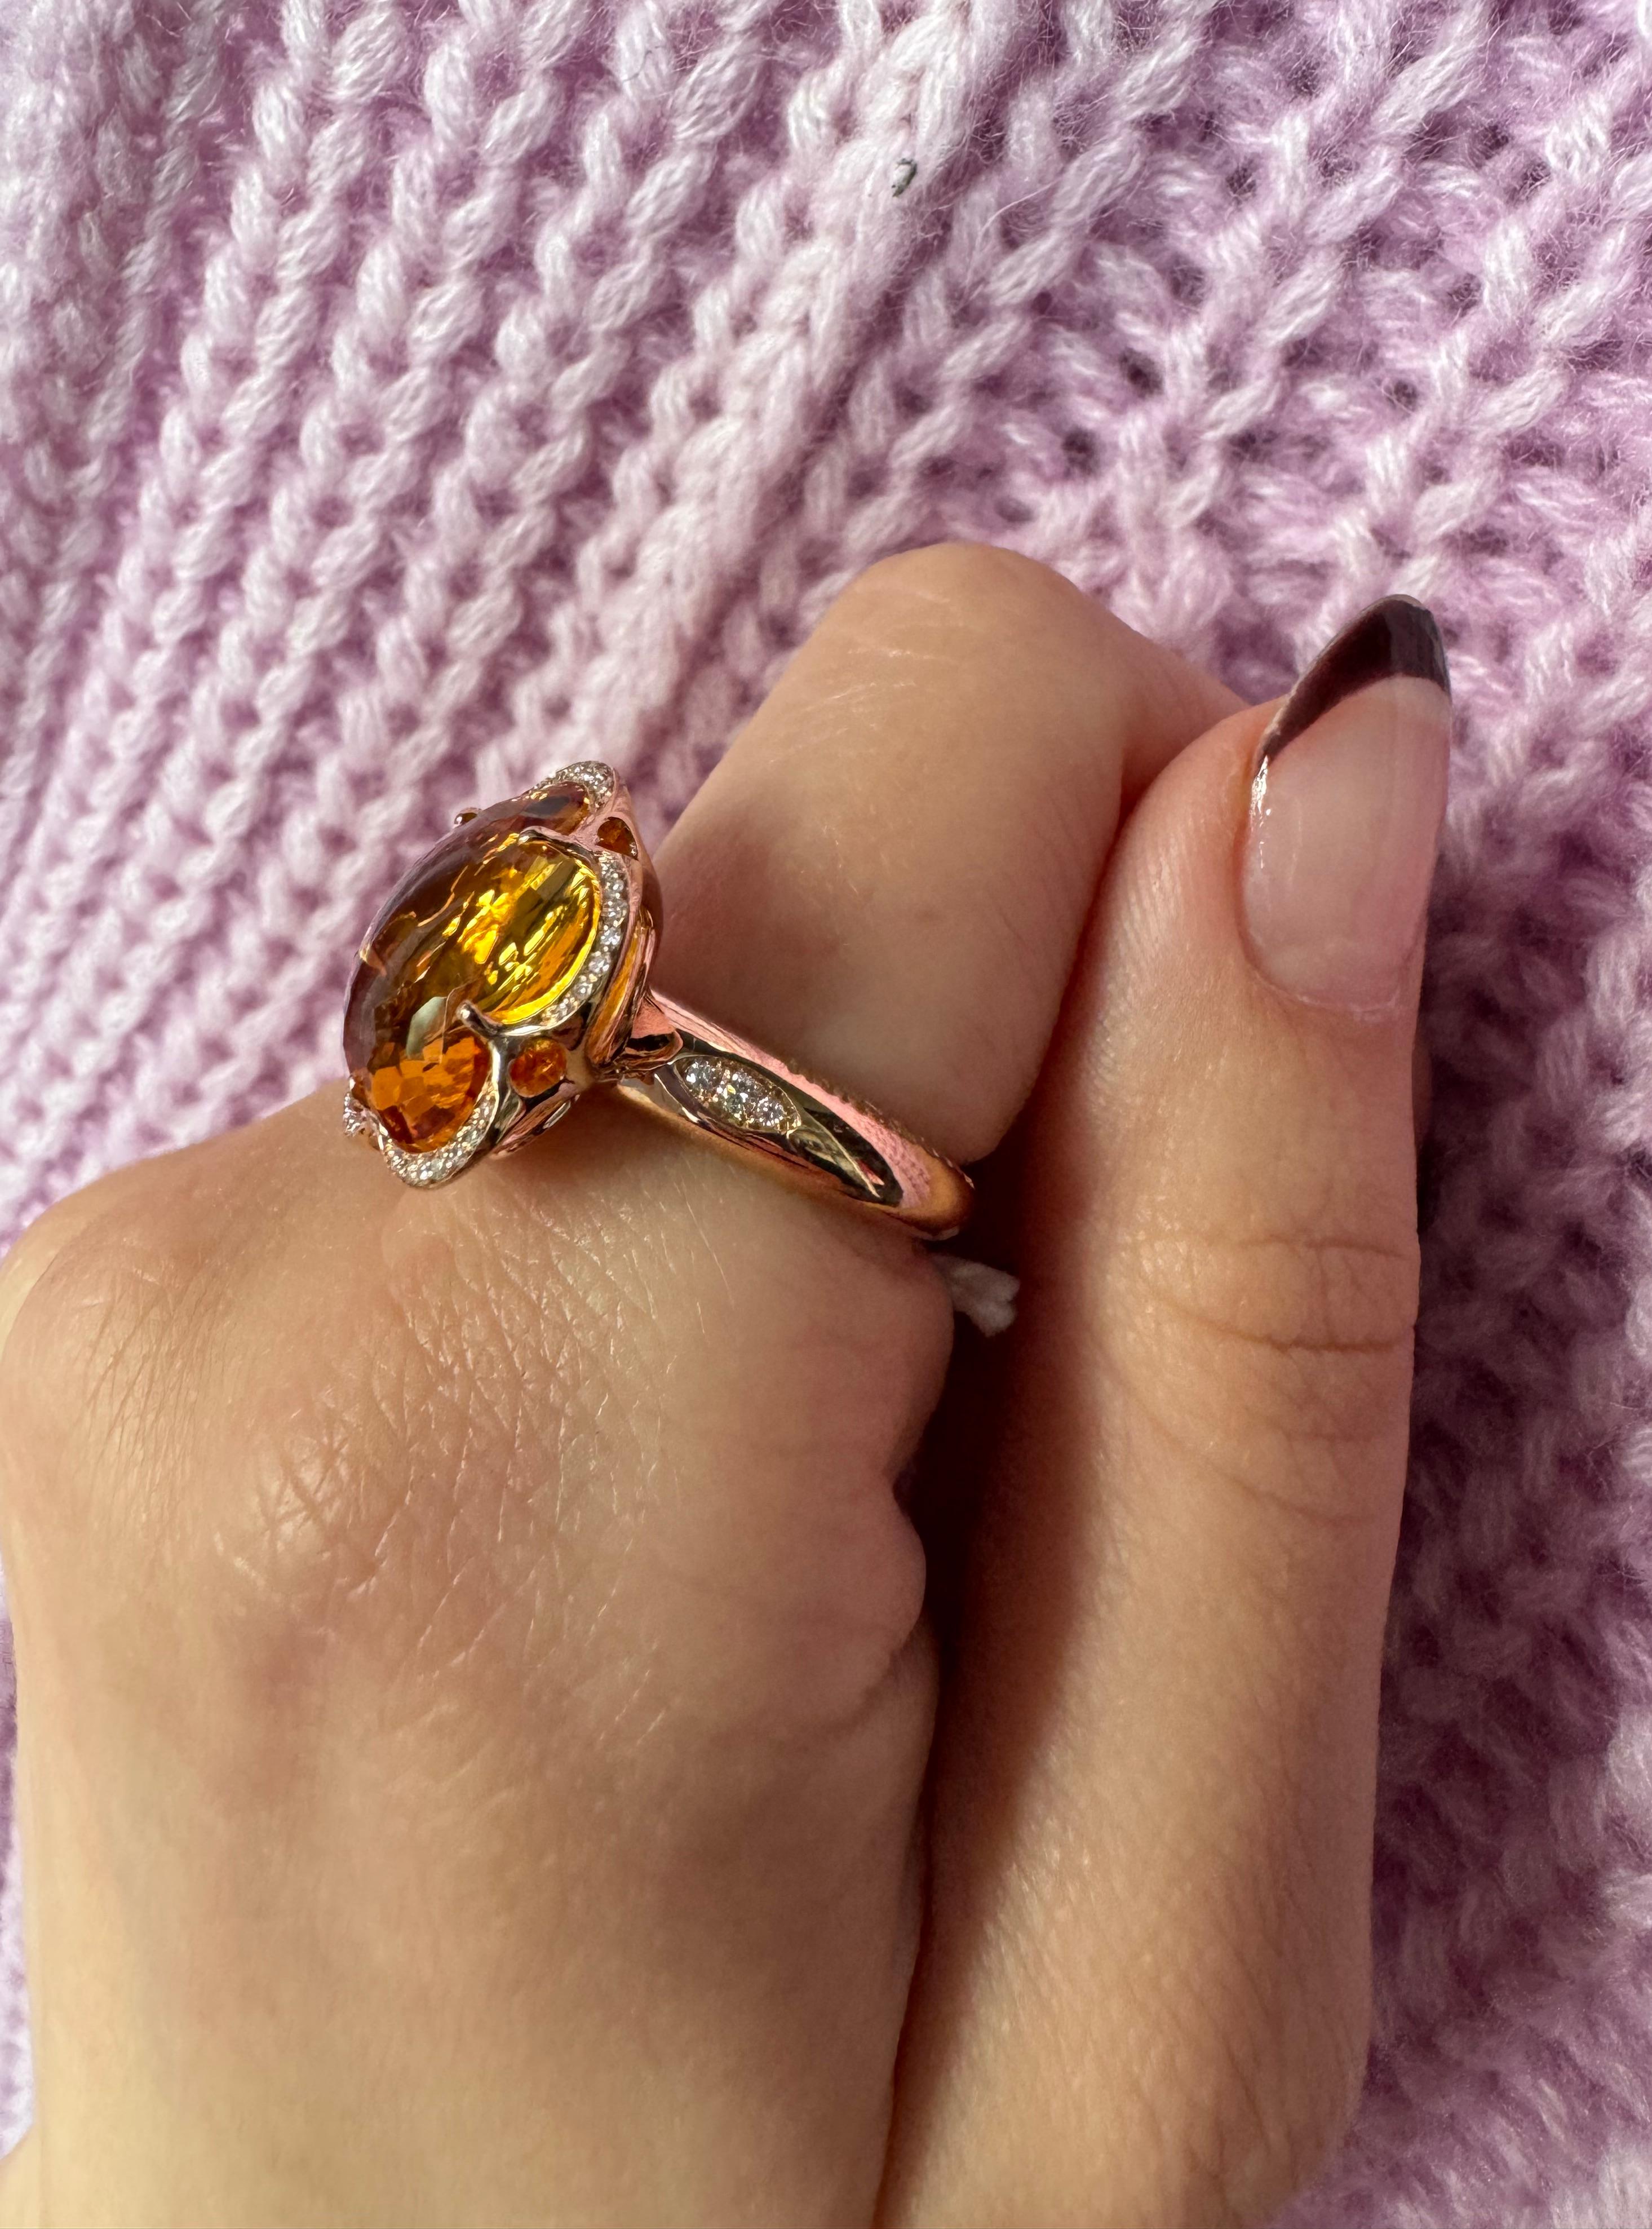 Pasquale Bruni Bon Ton 18K Rose Gold Ring with Citrine & Diamonds, Size 12 In New Condition For Sale In Carmel By The Sea, CA